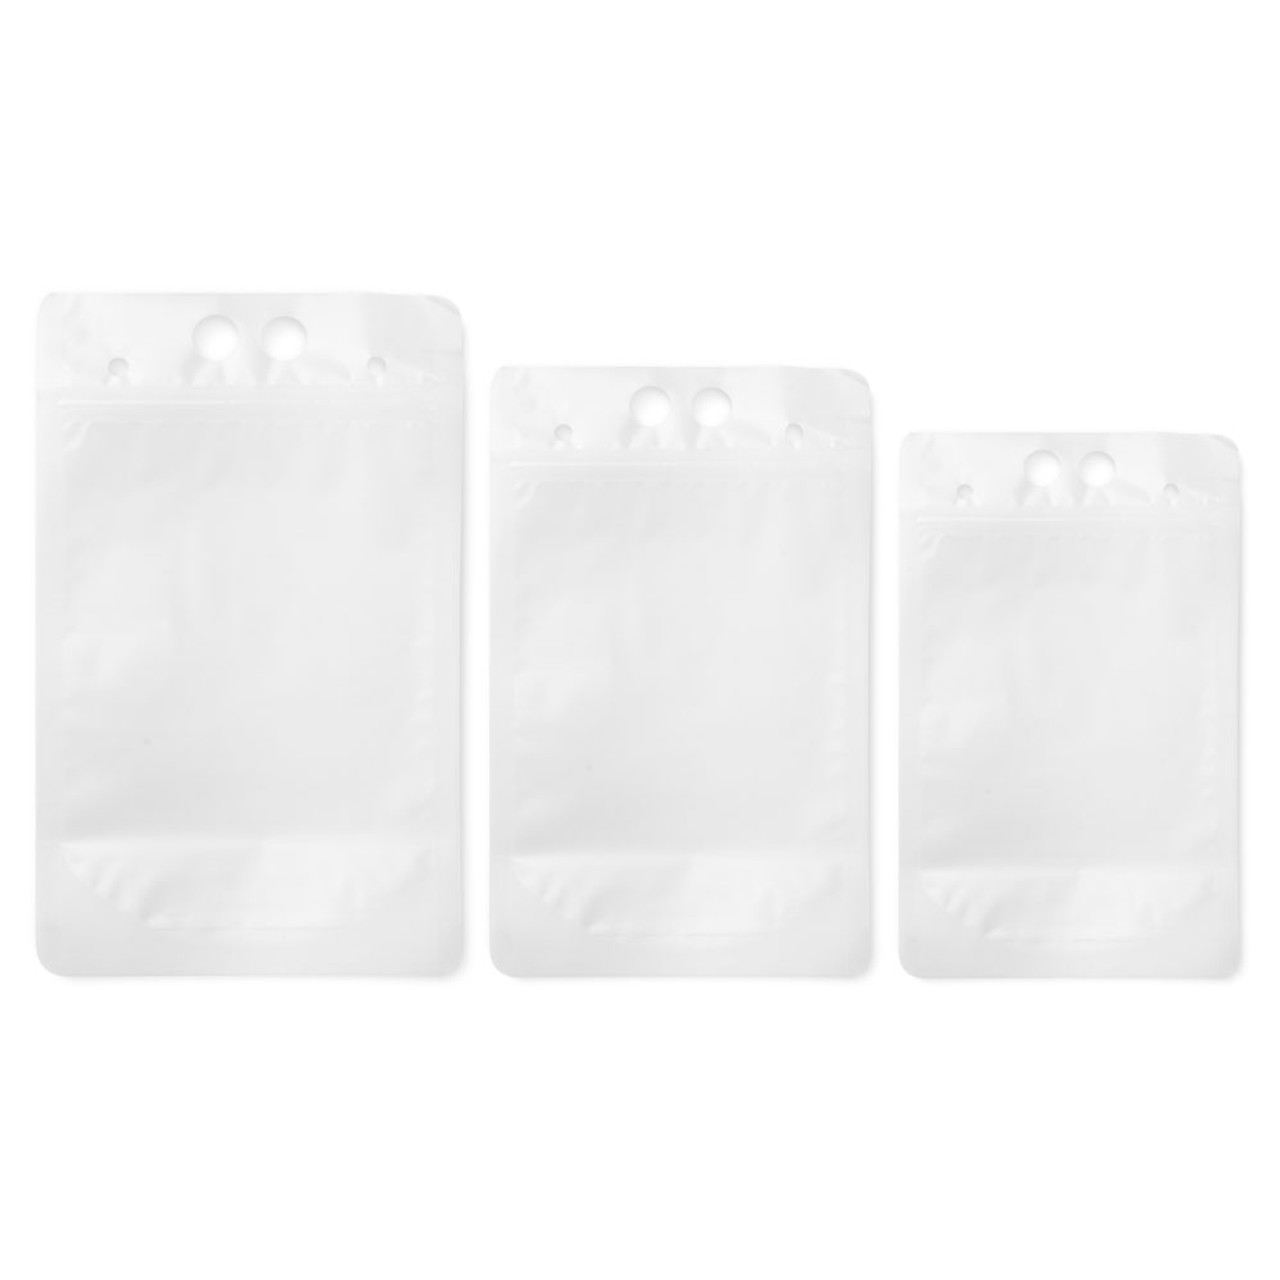 https://cdn11.bigcommerce.com/s-cznxq08r7/images/stencil/1280x1280/products/5023/13922/TO-GO-POUCH-100-To-Go-Plastic-Stand-Up-Beverage-Pouches-100-Pack-2__95195.1628542706.jpg?c=1